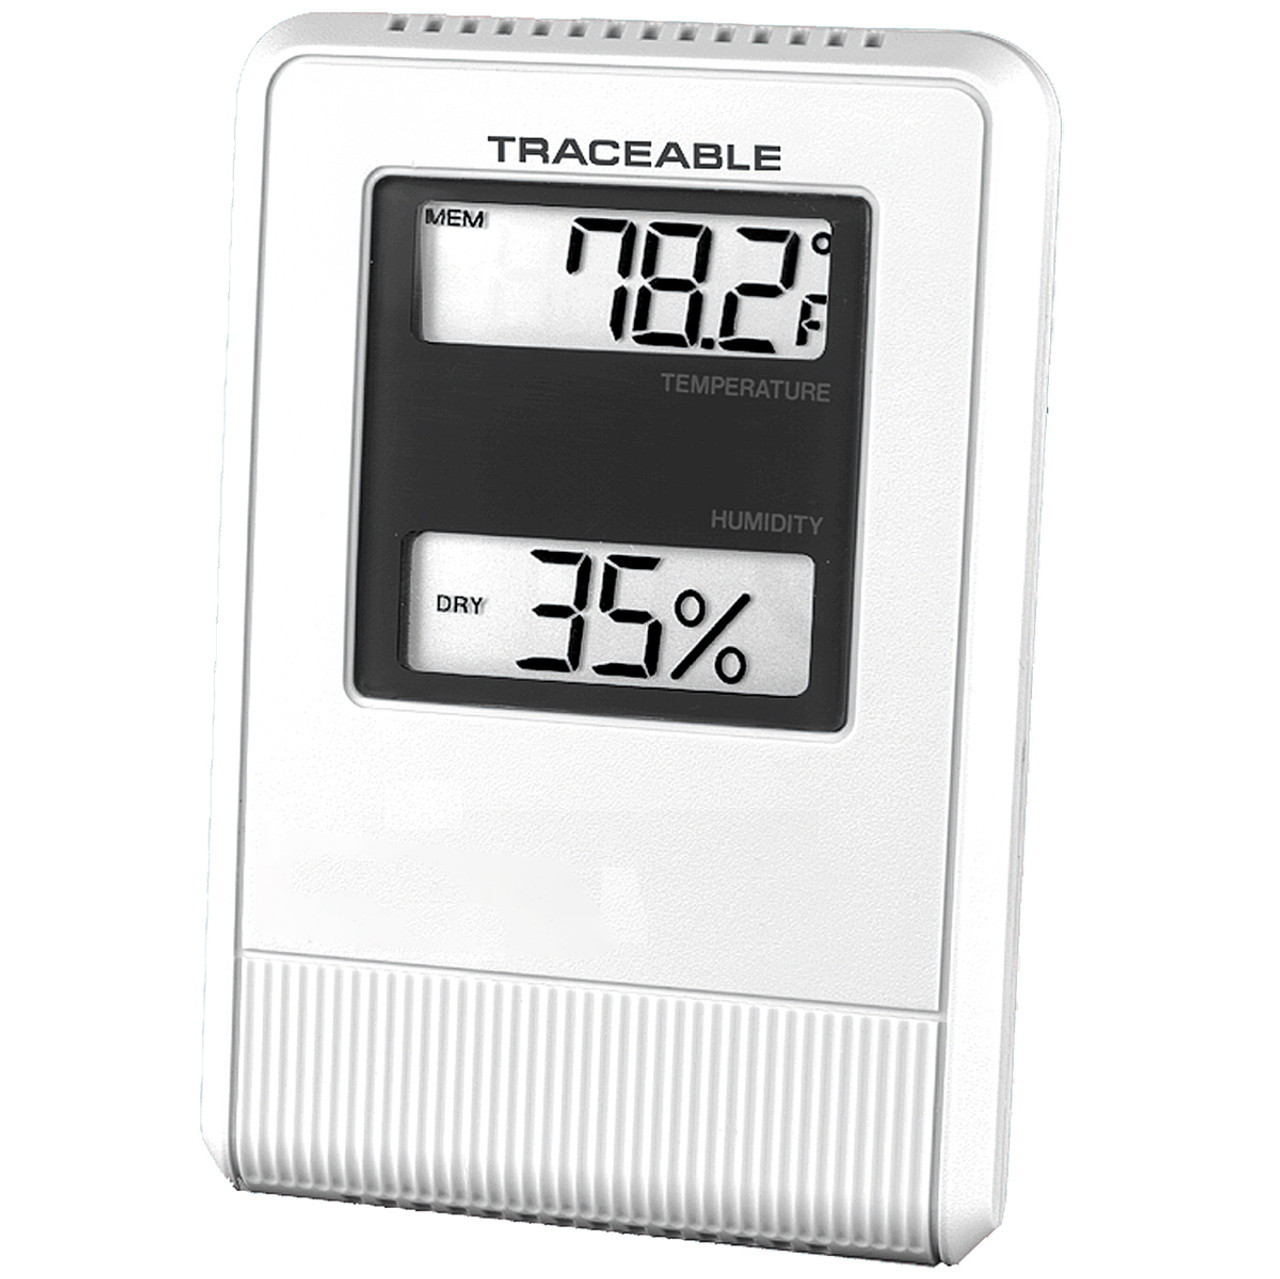 Control Company TraceableLIVE WiFi Datalogging Hygrometer/Thermometer